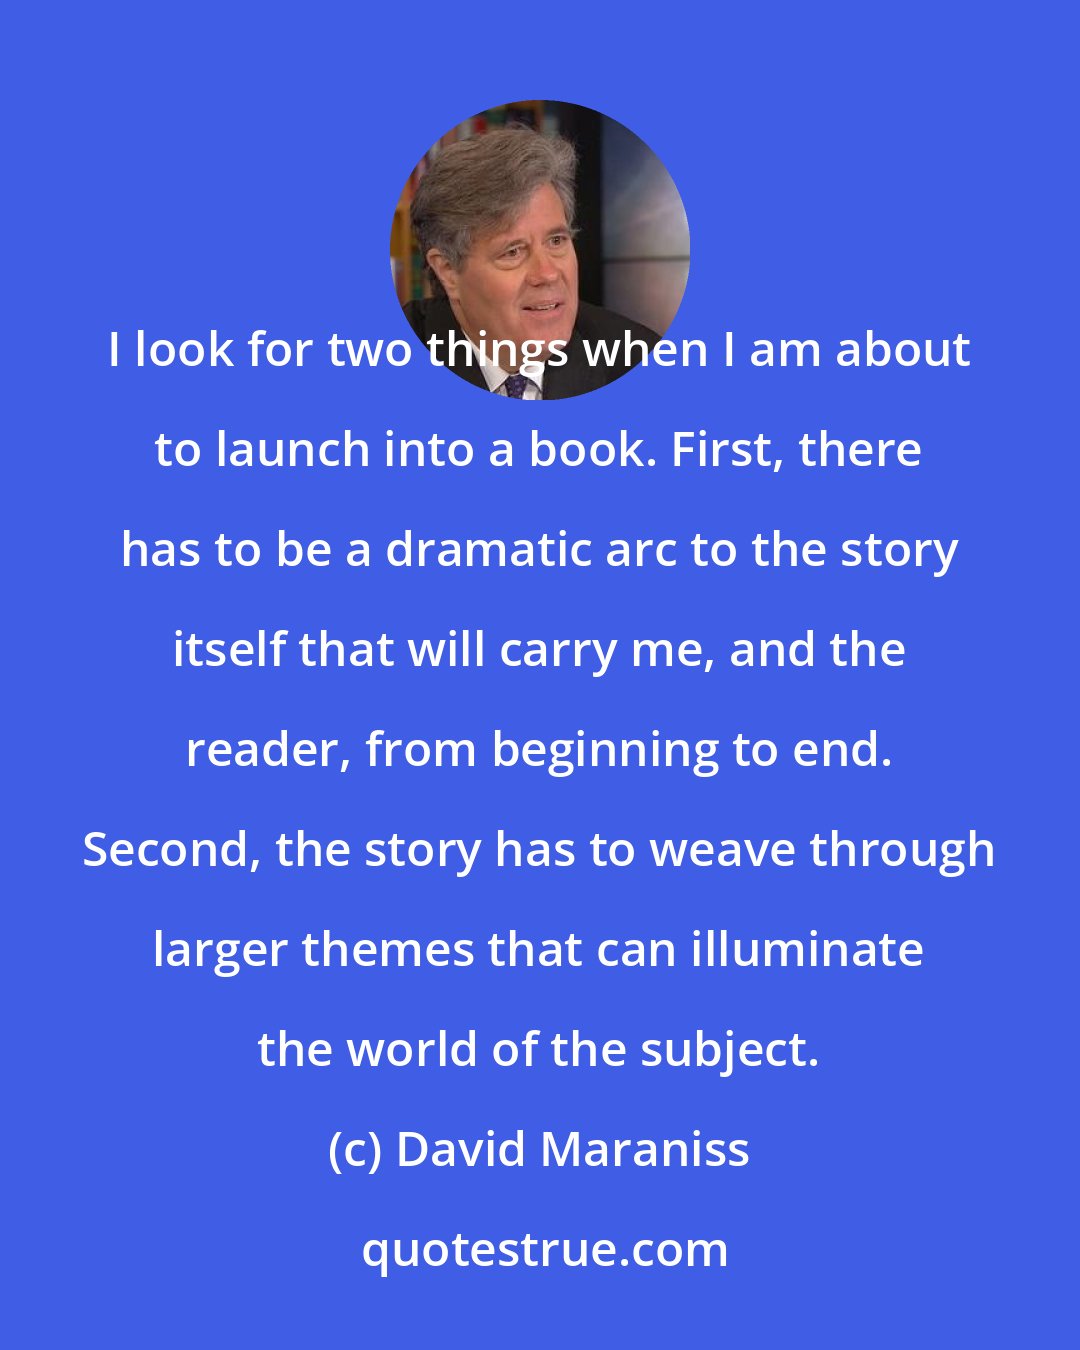 David Maraniss: I look for two things when I am about to launch into a book. First, there has to be a dramatic arc to the story itself that will carry me, and the reader, from beginning to end. Second, the story has to weave through larger themes that can illuminate the world of the subject.